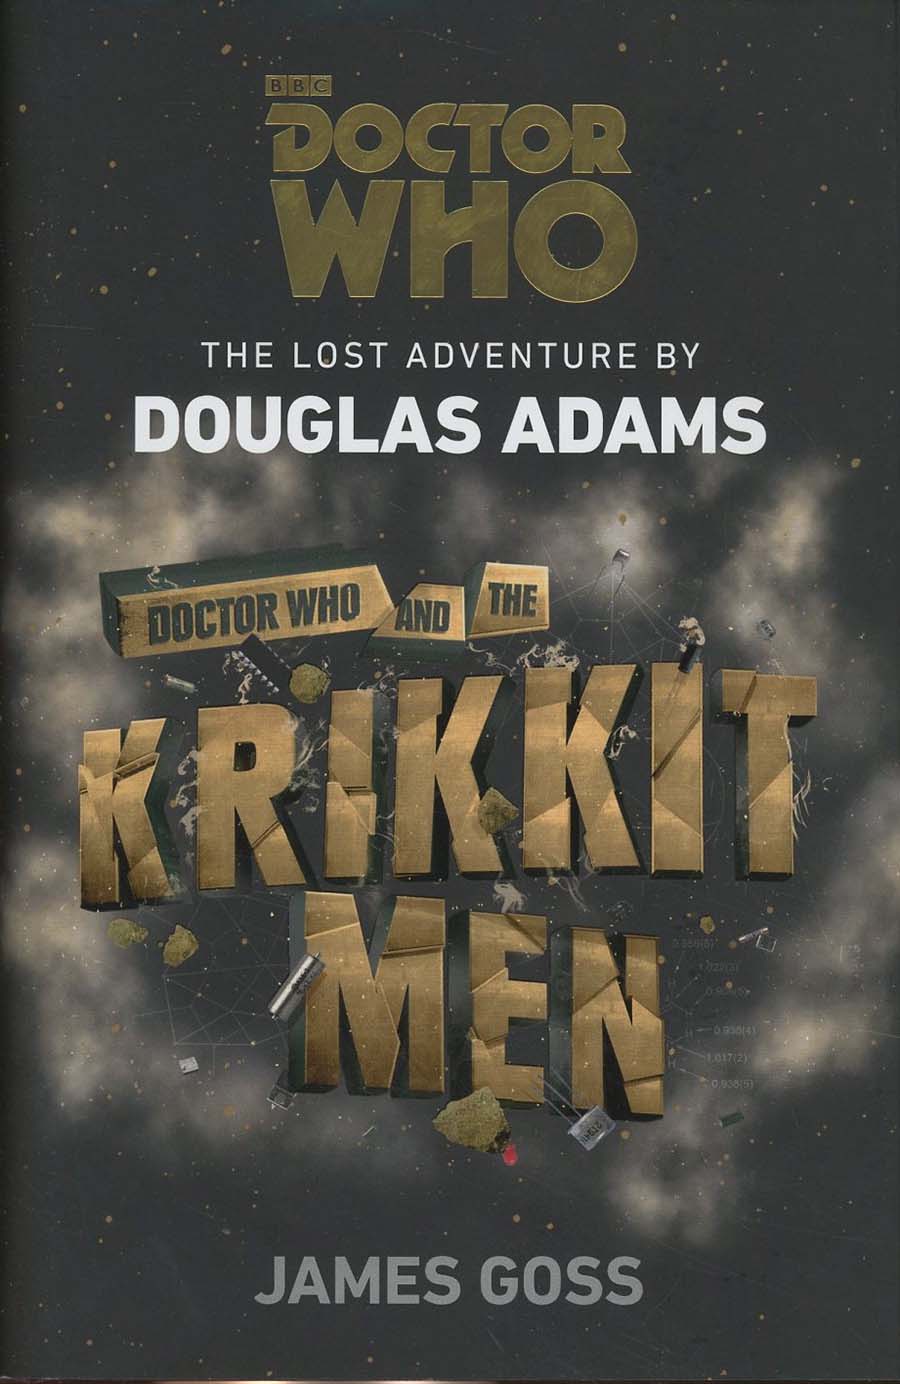 Doctor Who And The Krikkitmen HC